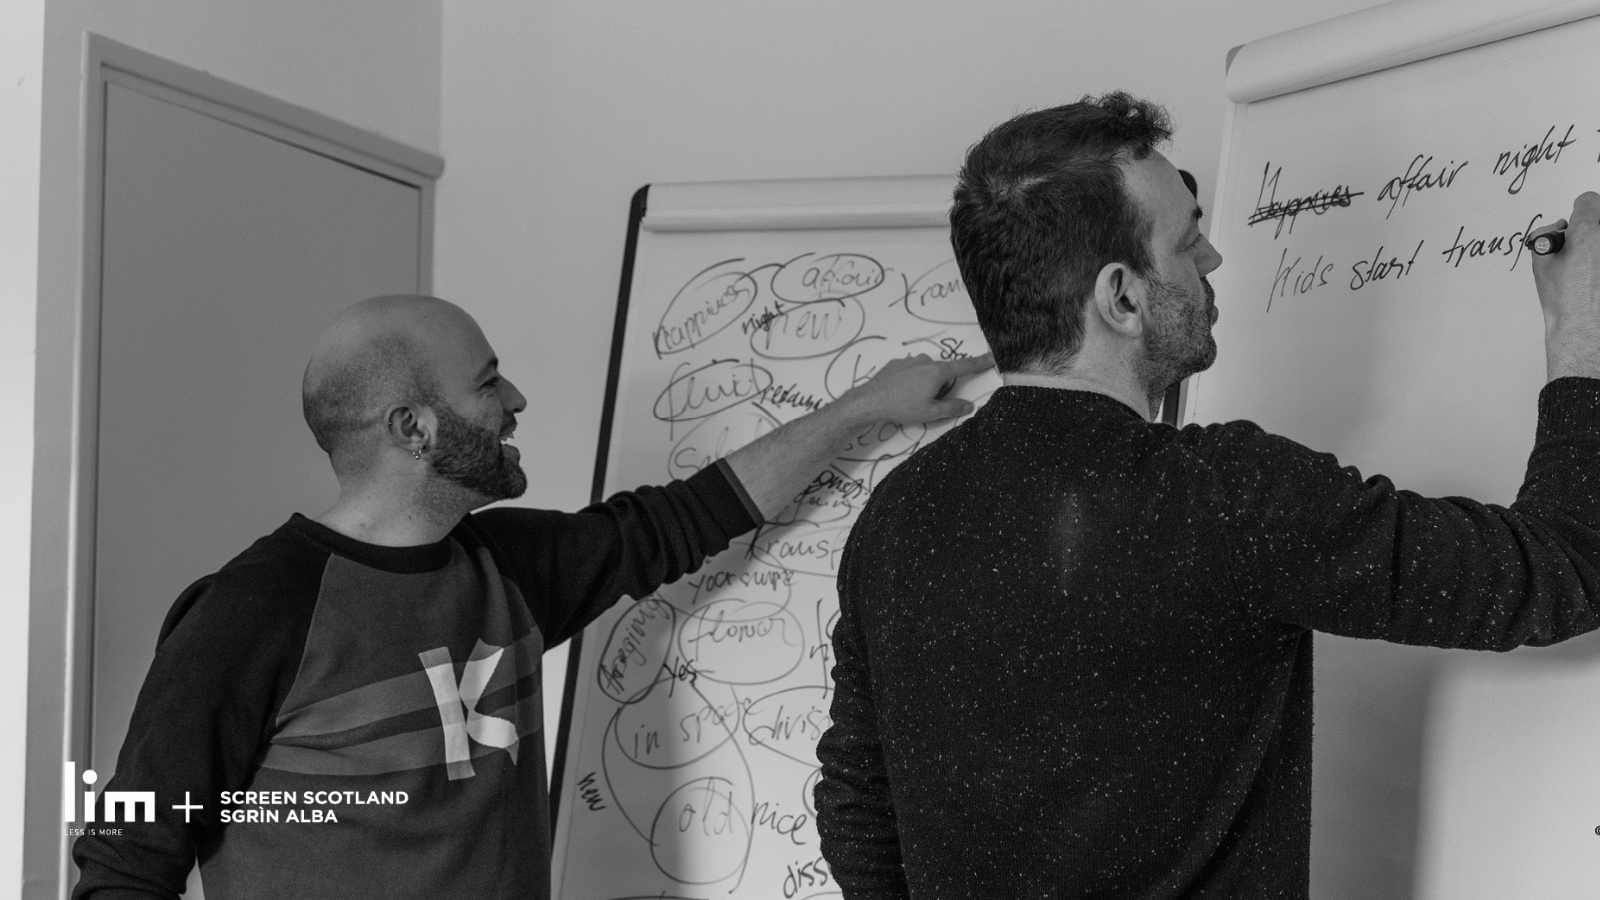 A bald man with a beard in a long sleeved top with the sleeves rolled up points at an obscured word on Flipchart covered in black writing. It looks like a brainstorming session. Another man to the right is writing 'kids start....' on another Flipchart.